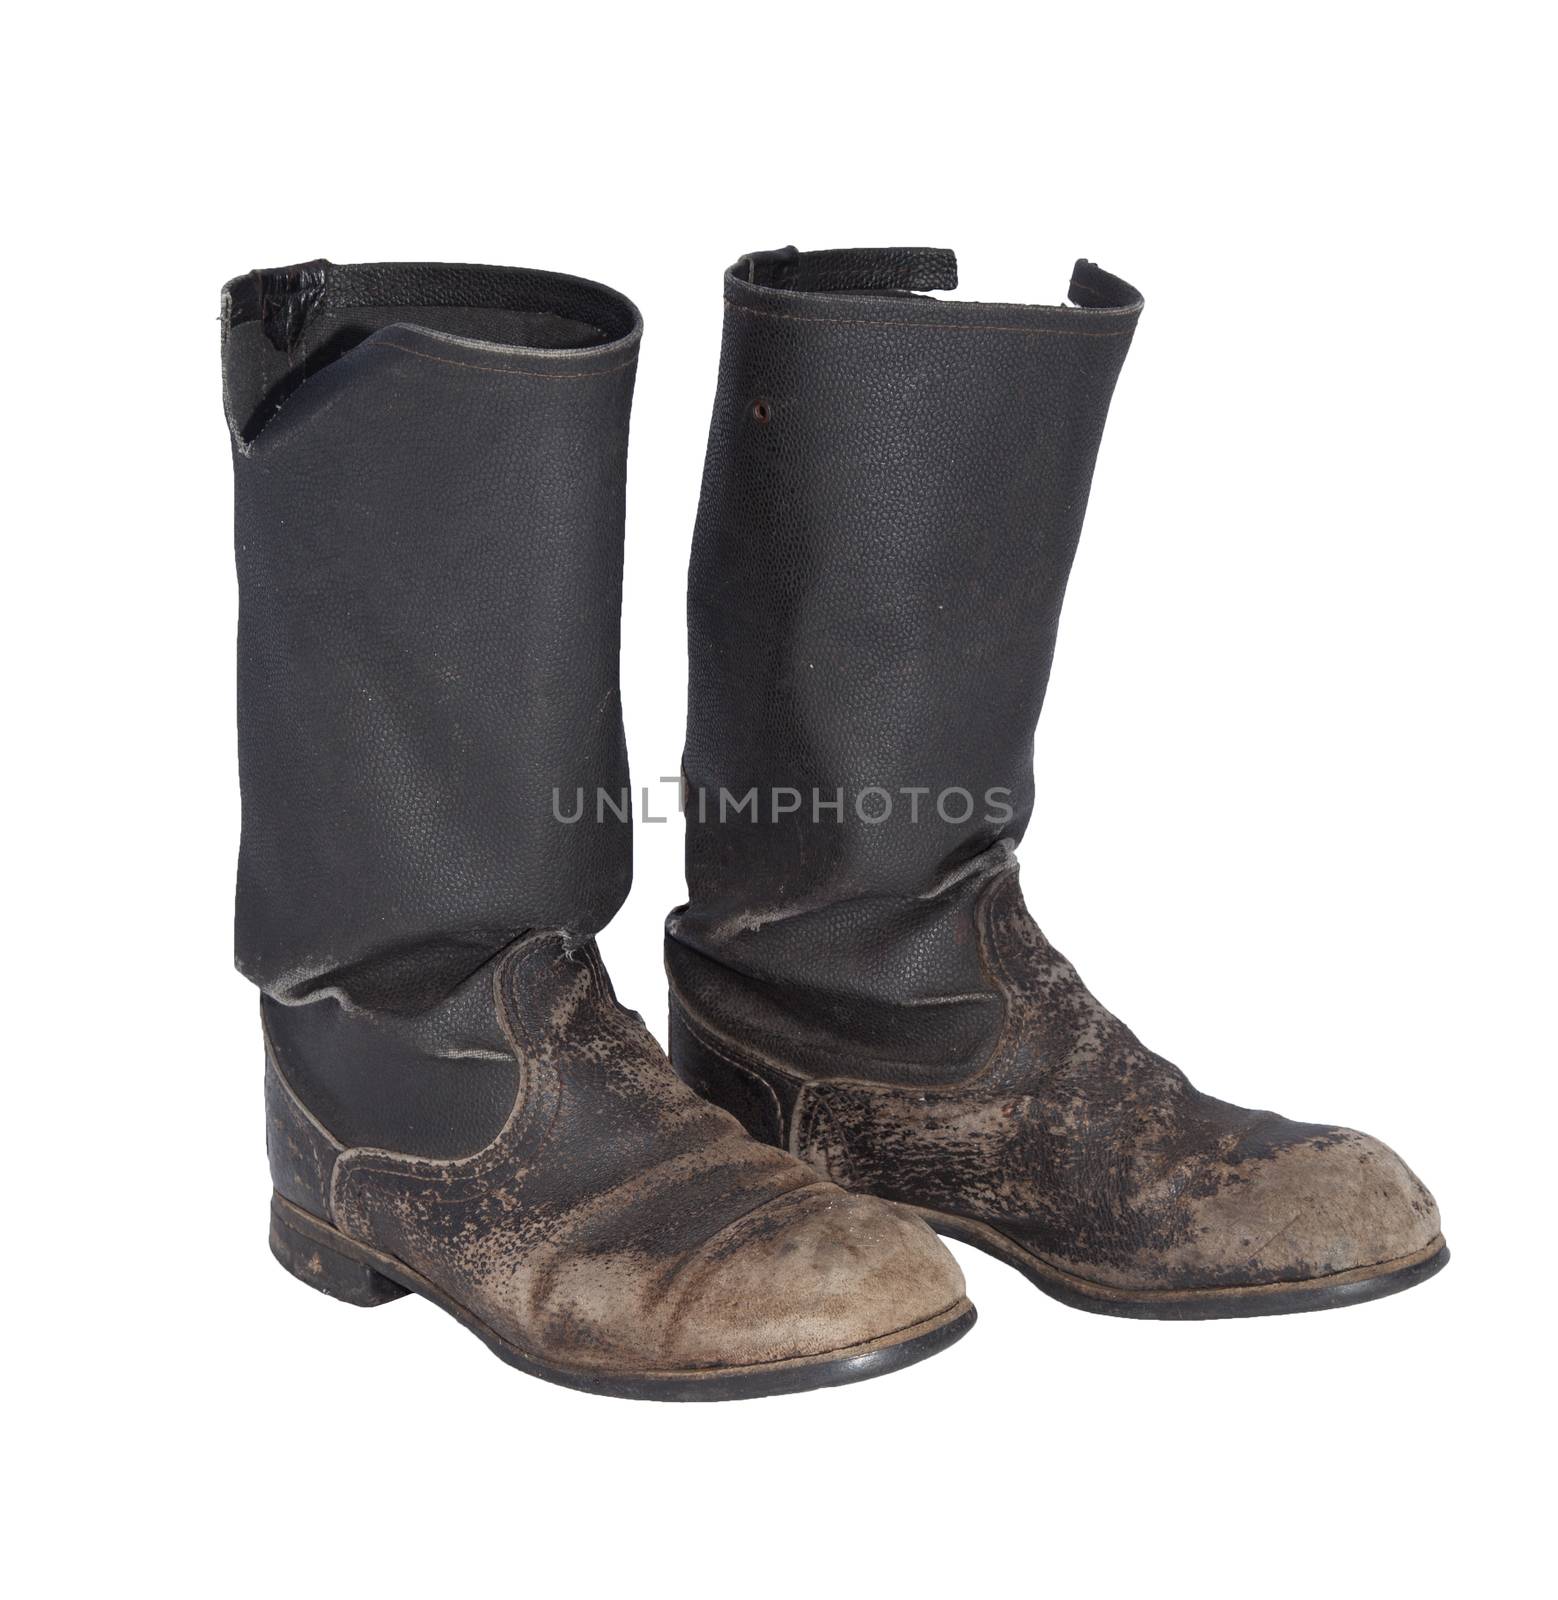 Old tarpaulin military boots isolated on a white background 